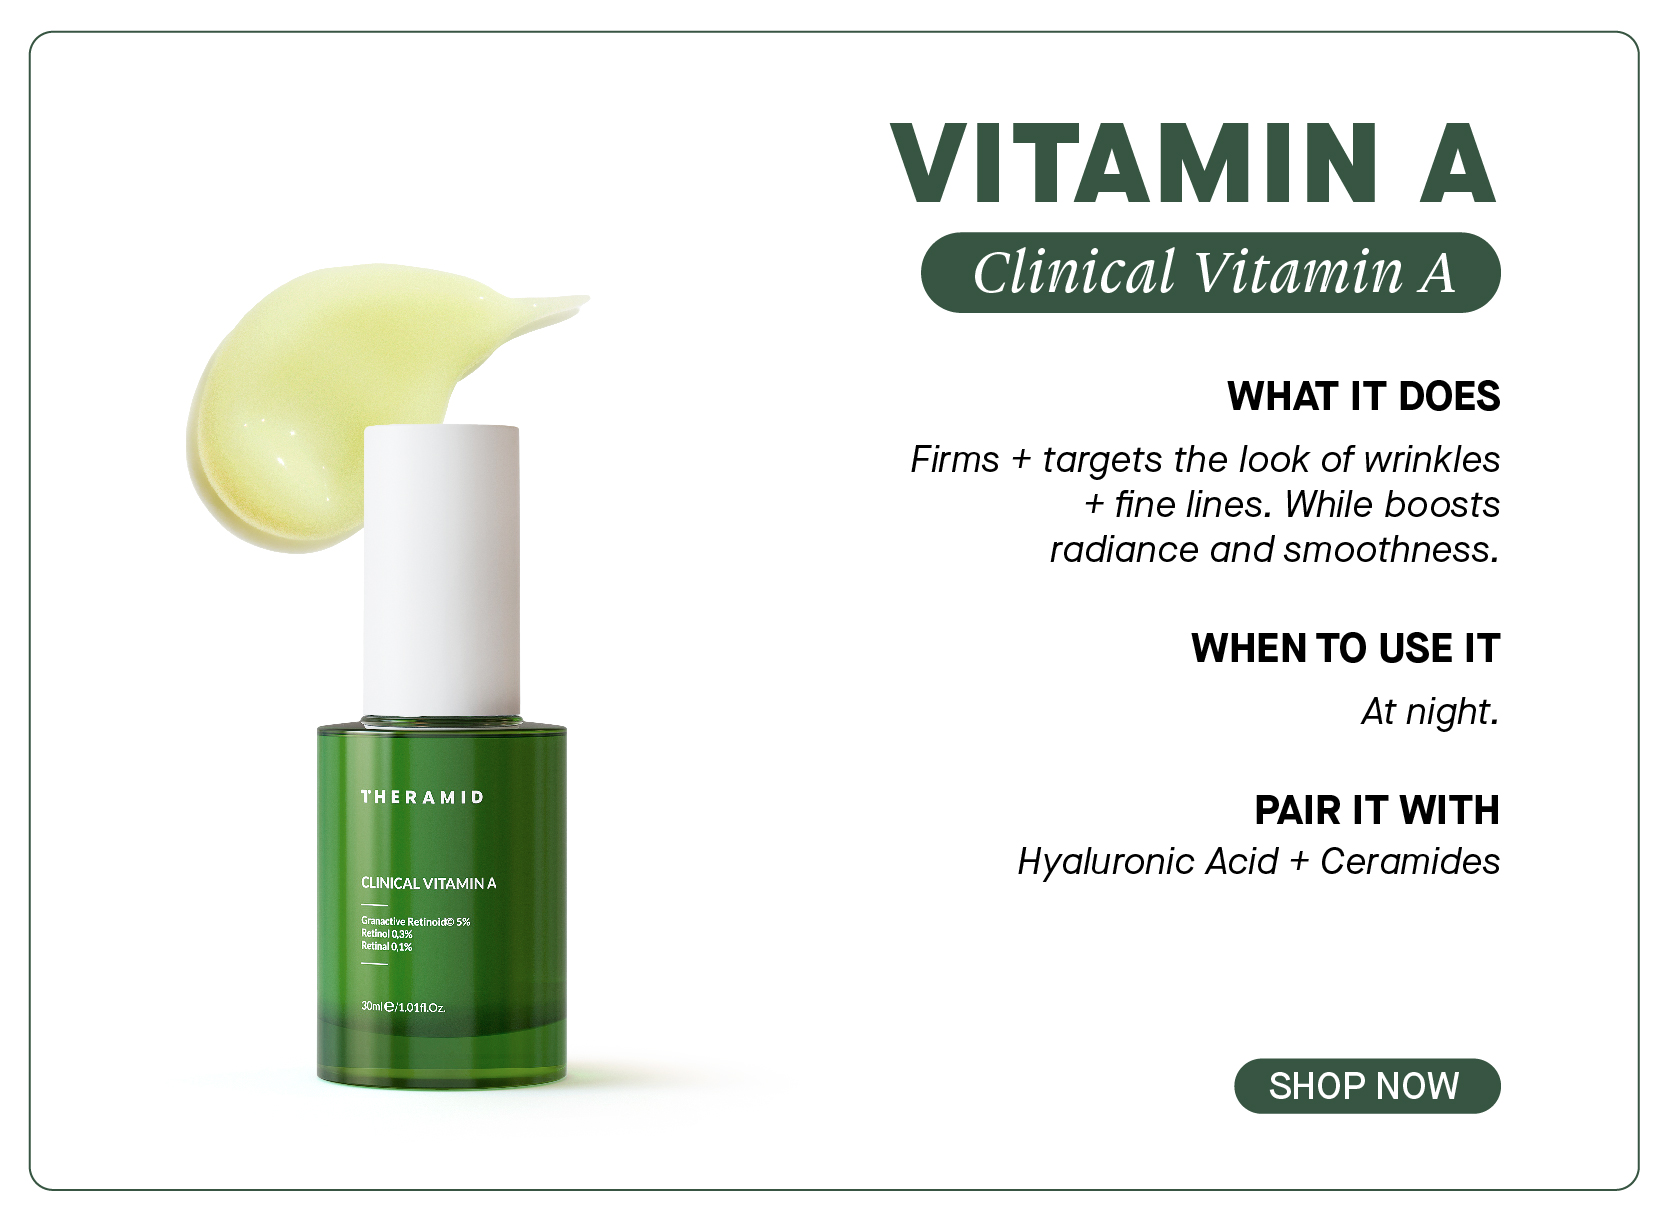  e THERAMID CLINICAL VITAMIN A CORIST I VITAMIN A WHAT IT DOES Firms targets the look of wrinkles fine lines. While boosts radiance and smoothness. WHEN TO USE IT At night. PAIR IT WITH Hyaluronic Acid Ceramides SHOP NOW 